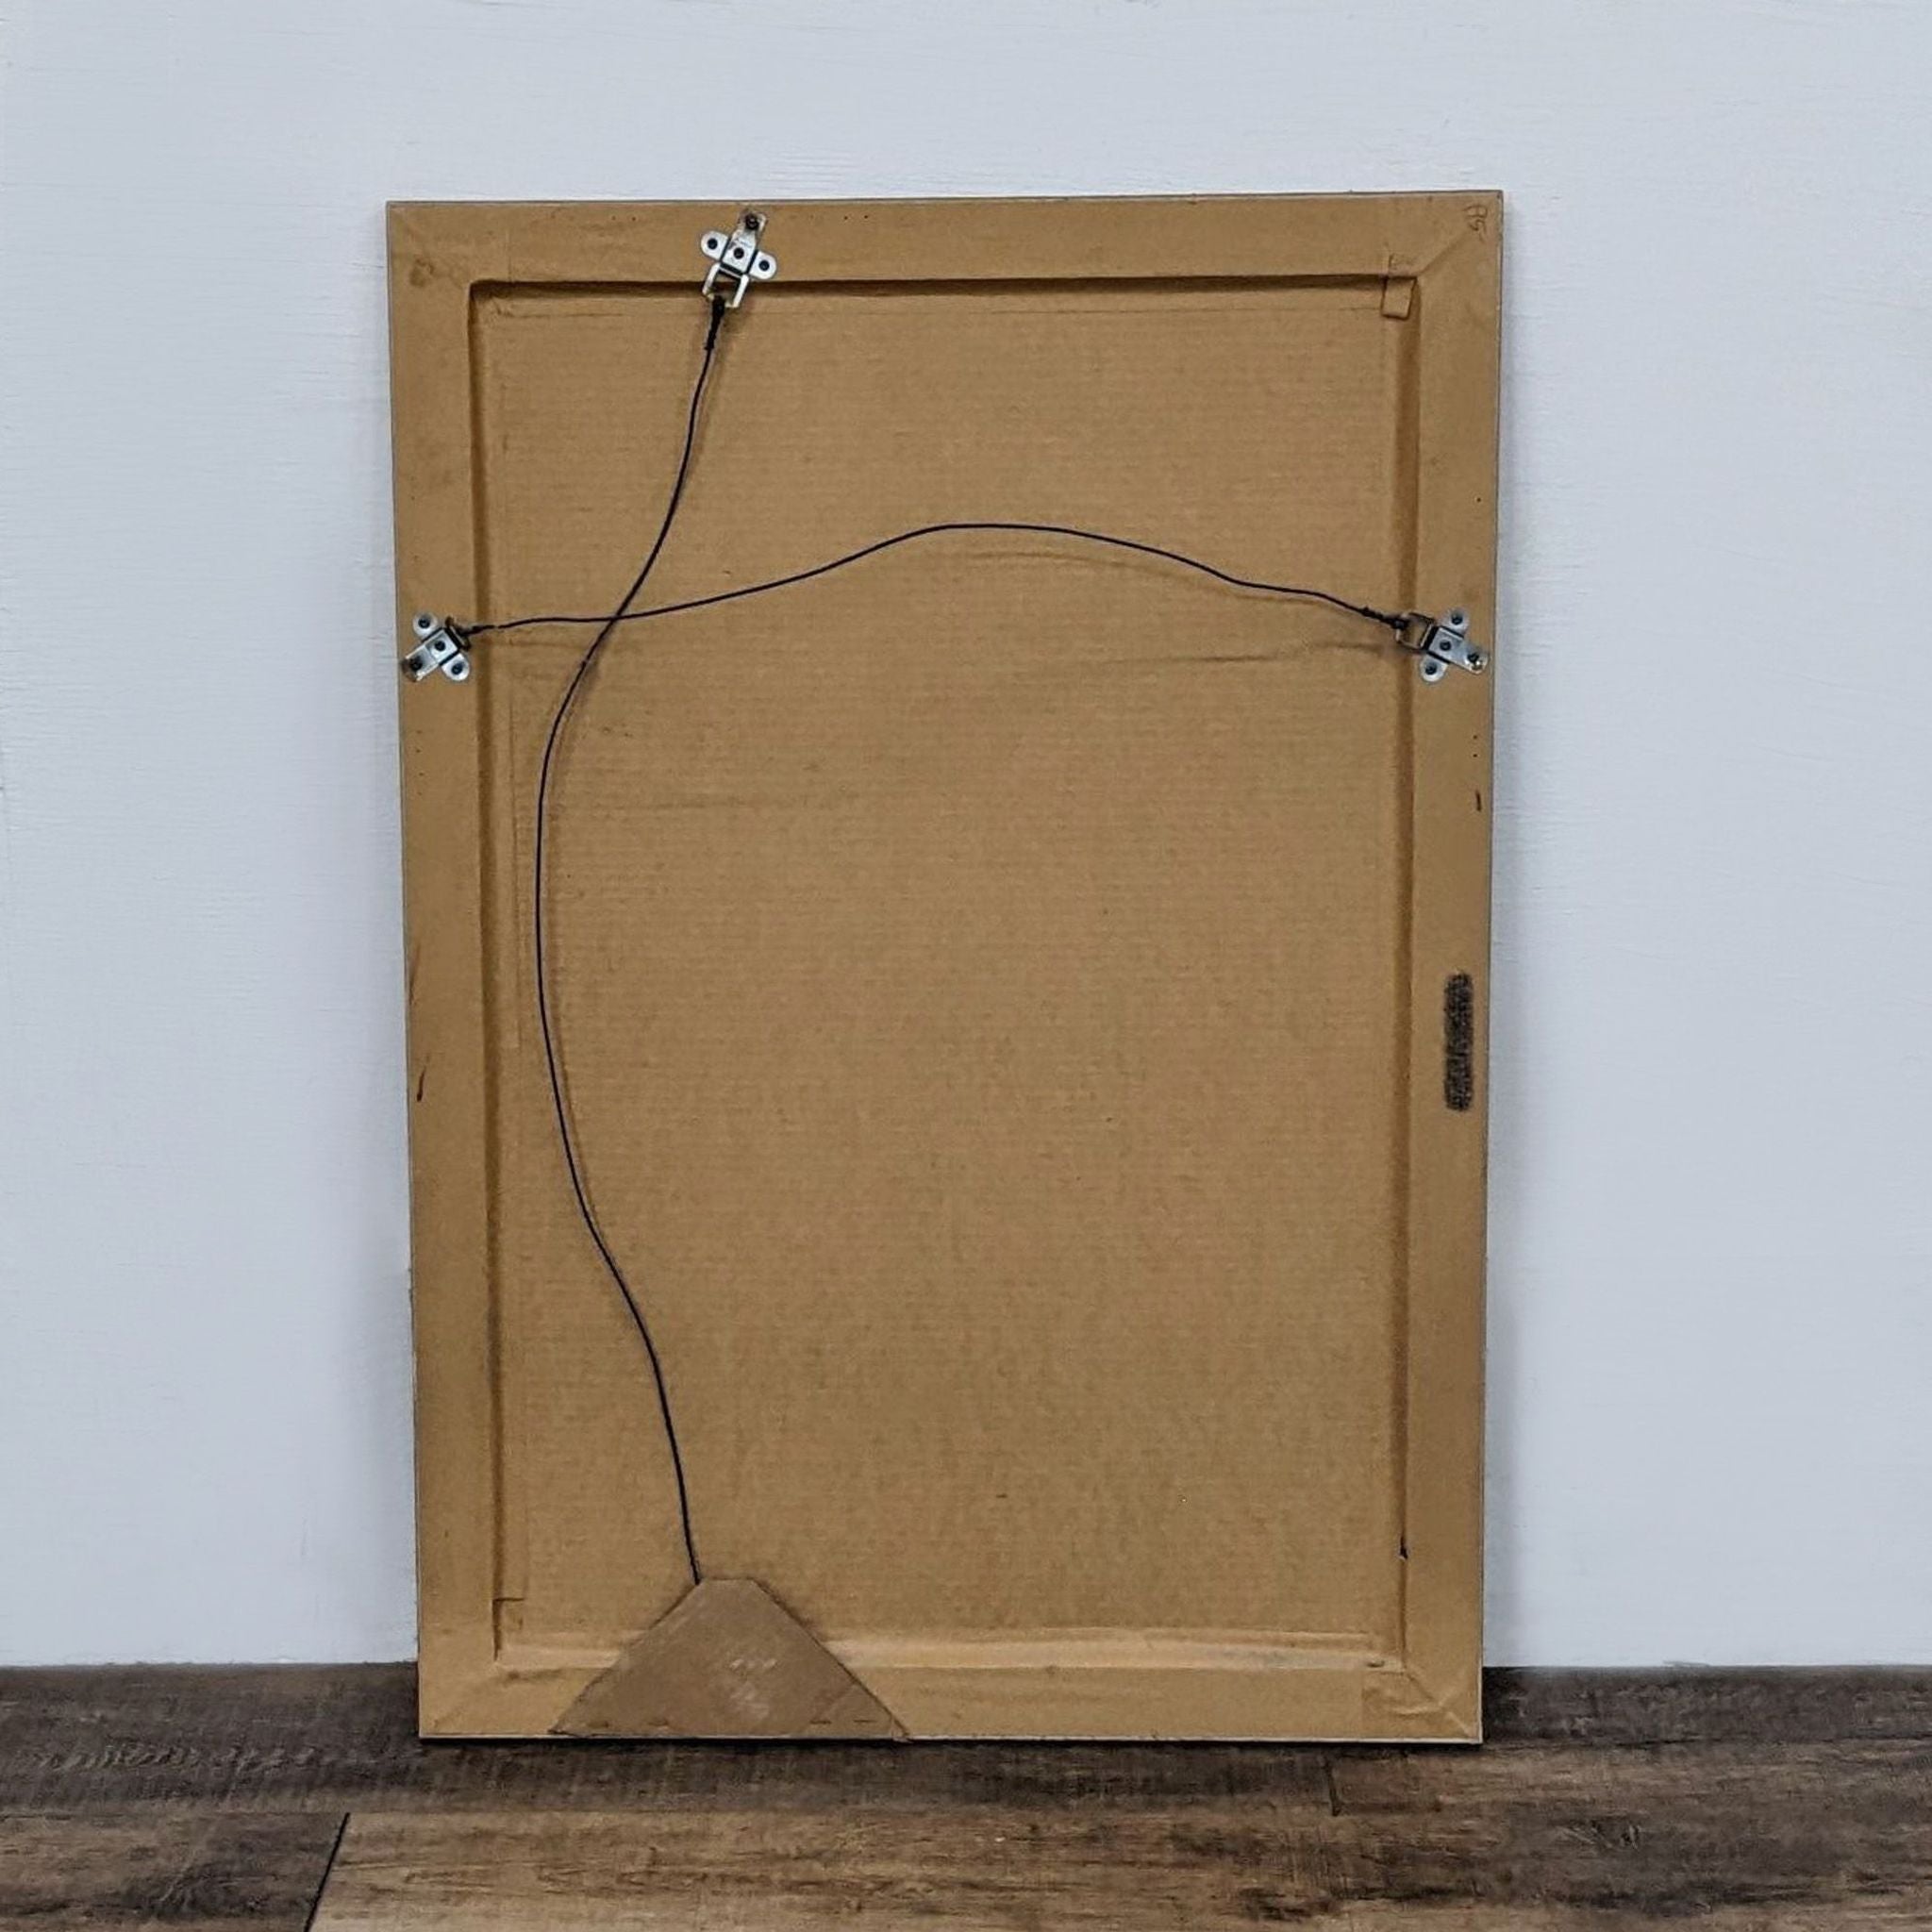 Back view of a Reperch wall mirror showing cardboard backing and hanging wire.